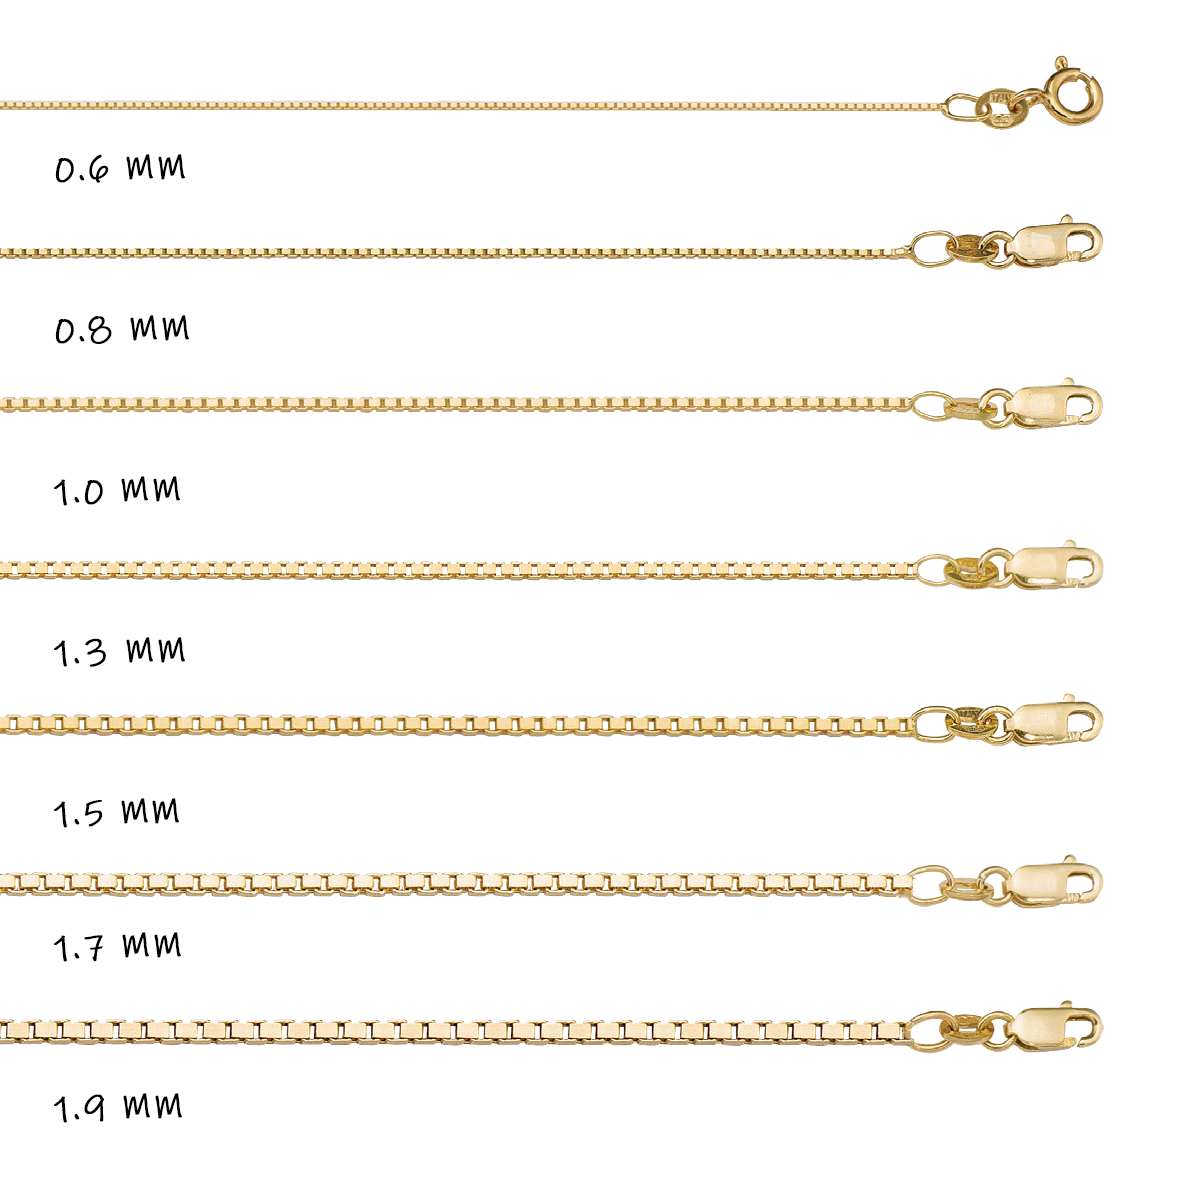 CBX01, Gold Chain, Box, Yellow Gold, 0.6 to 1.3 mm